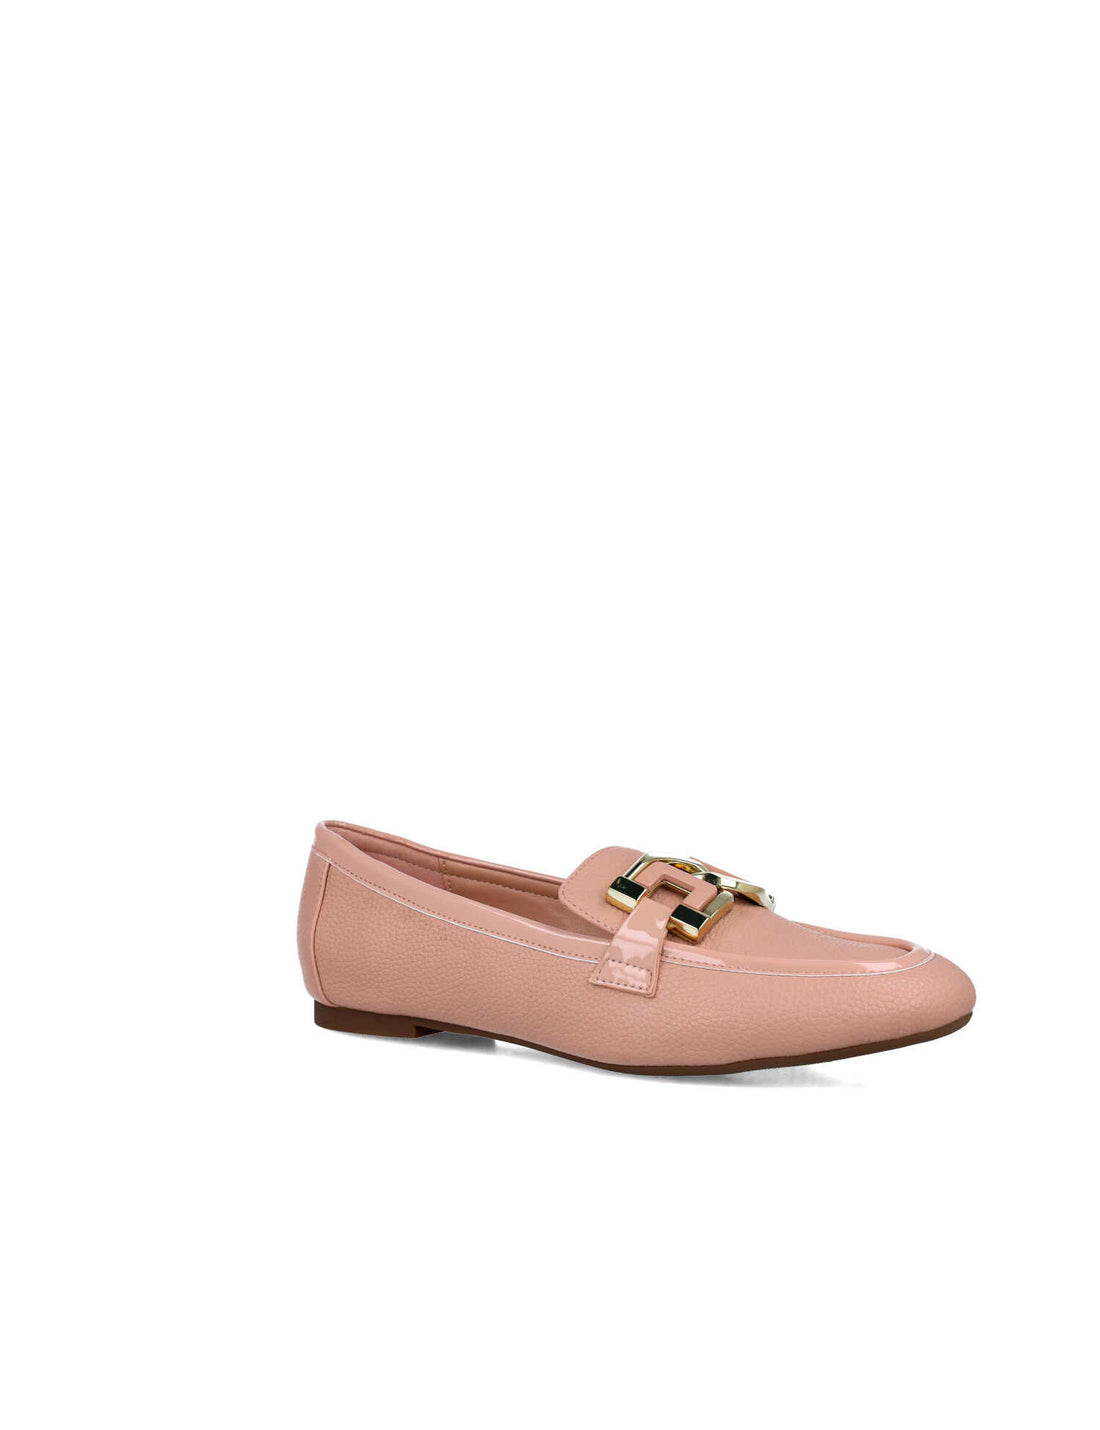 Pink Loafers With Gold Buckle_25298_97_02